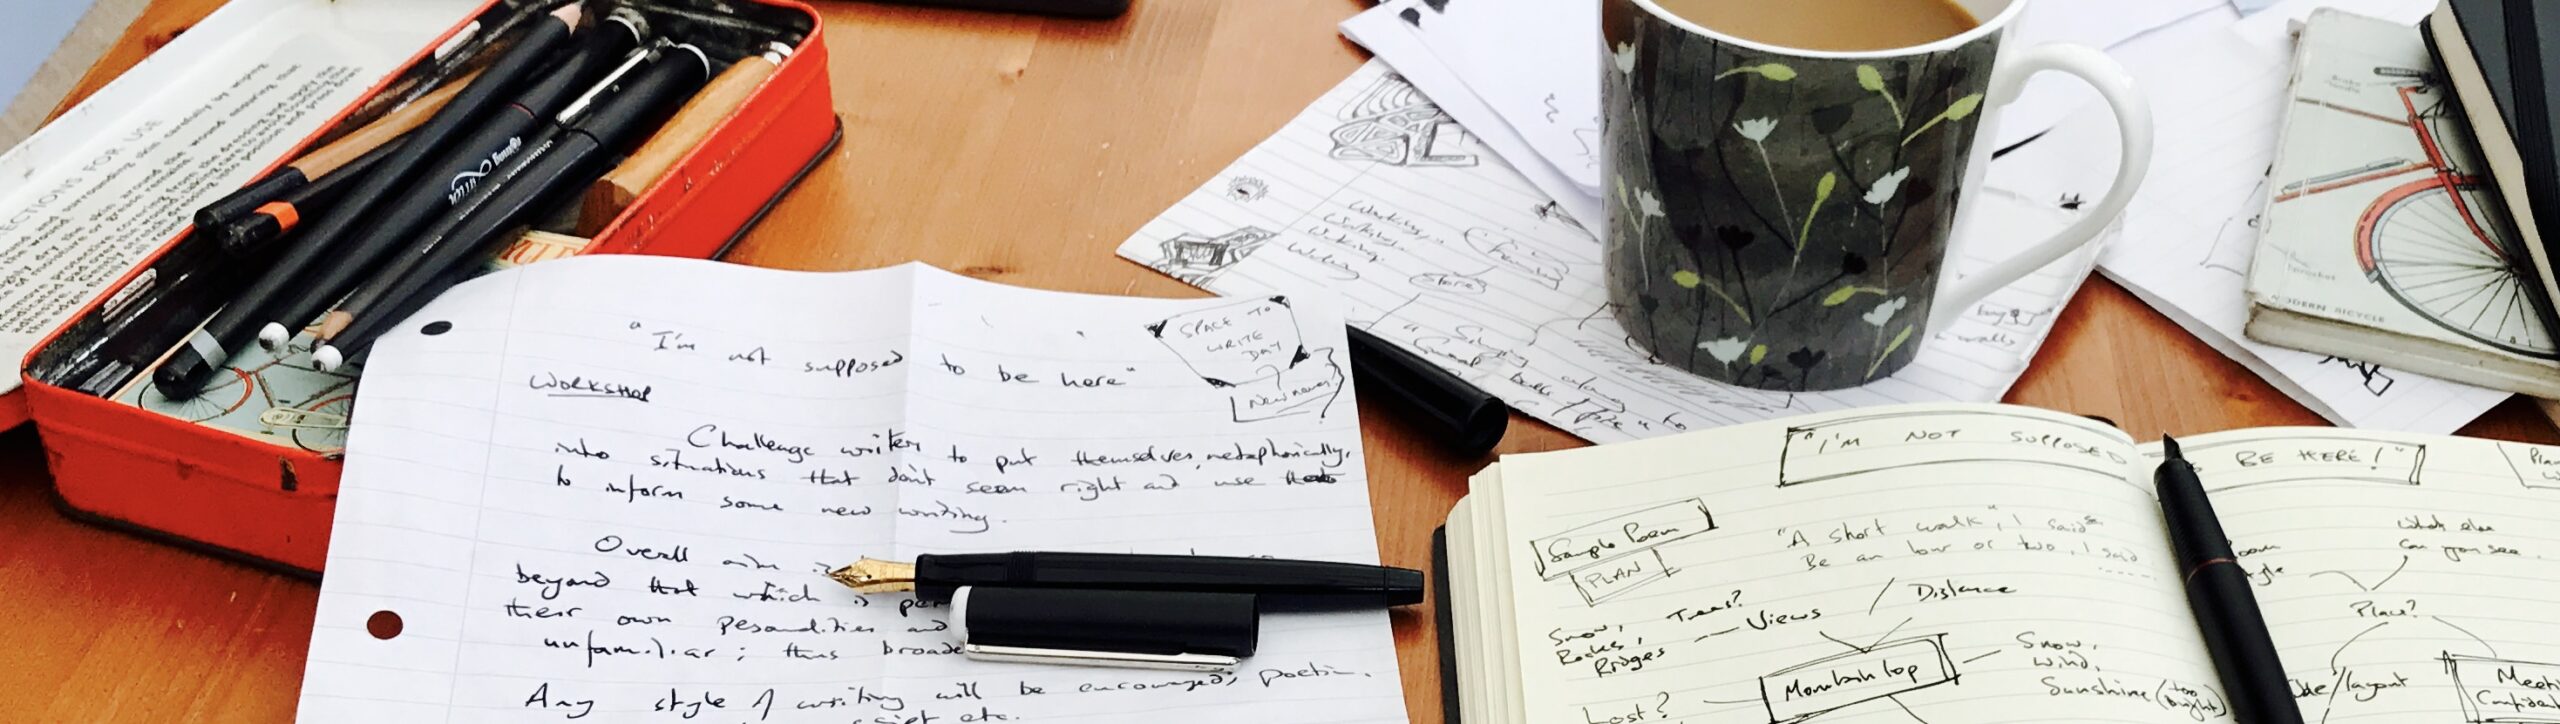 Image showing writing papers, pens and coffee cup during a writing session